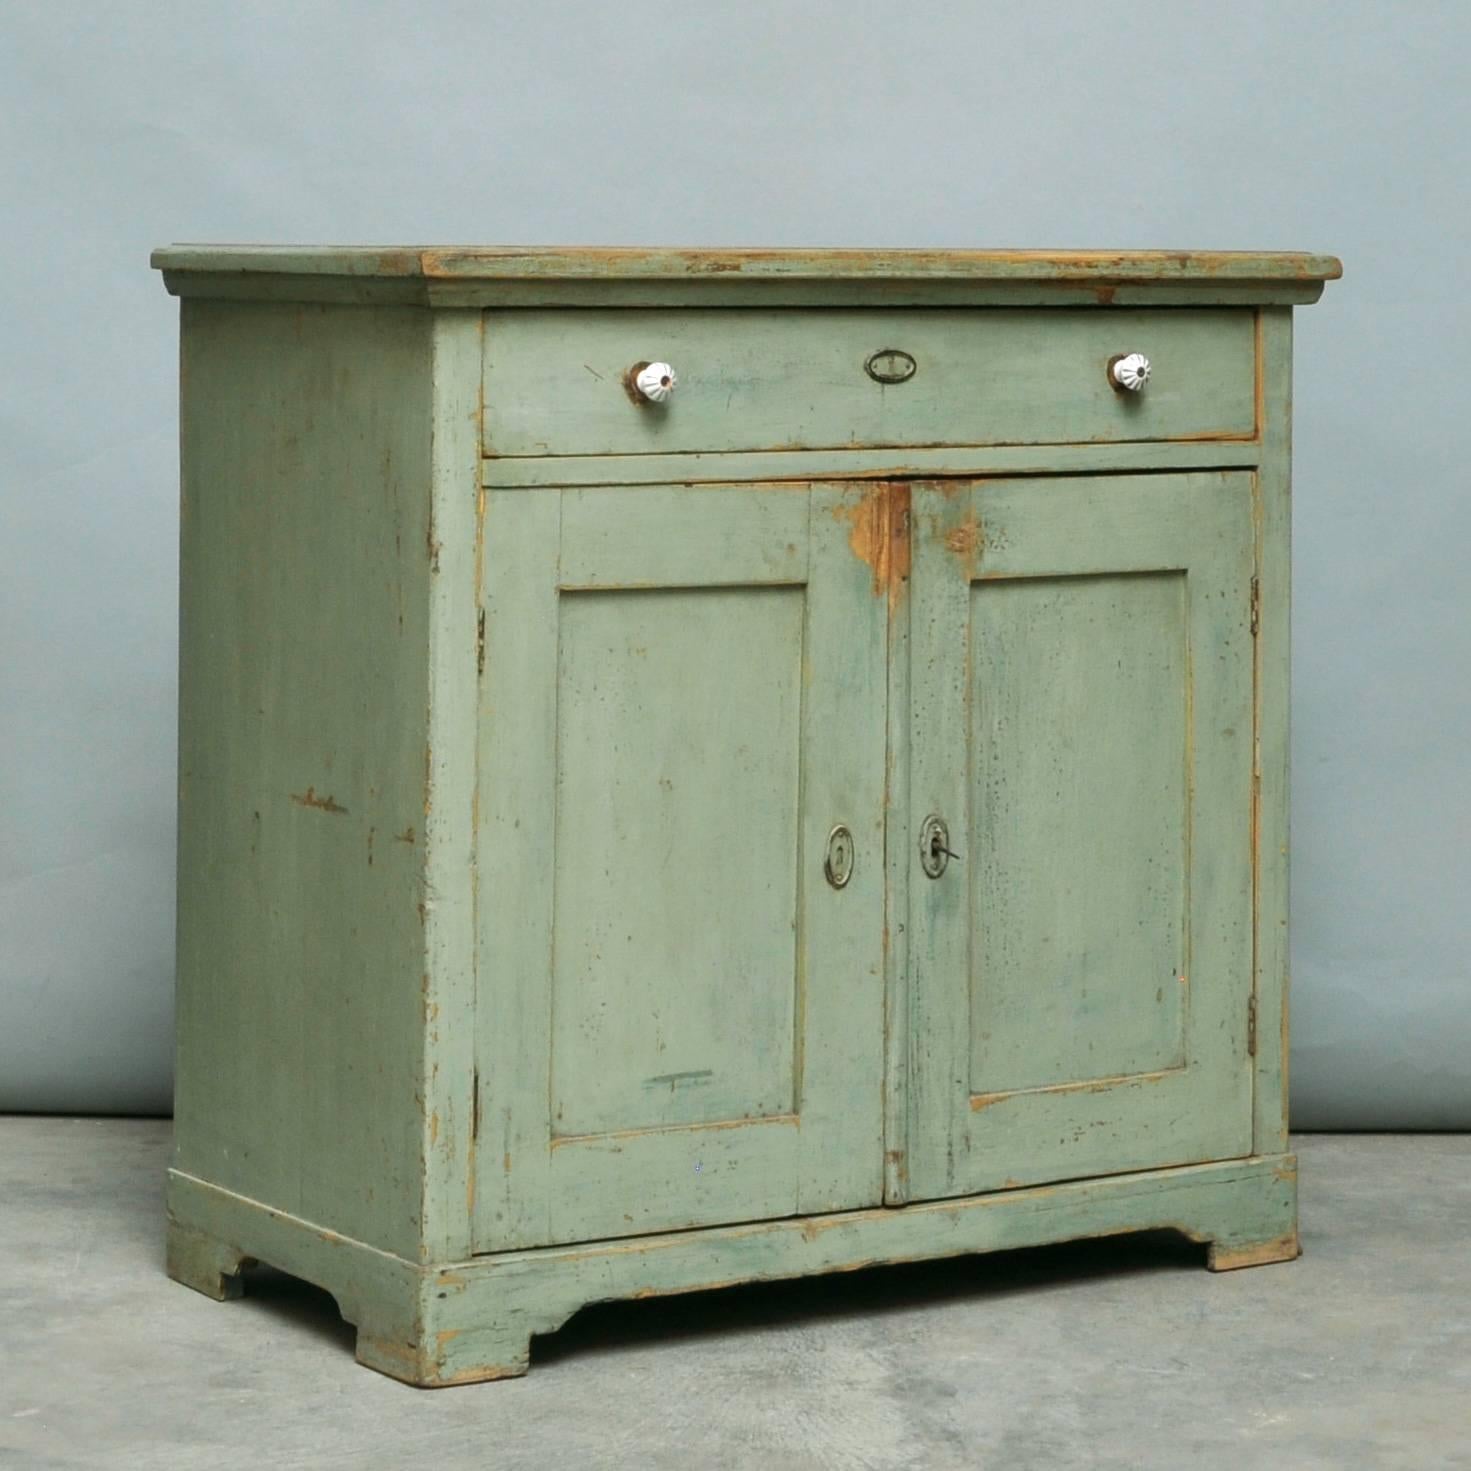 This small cabinet from the 1930s is made of pine. It features its original green paint.